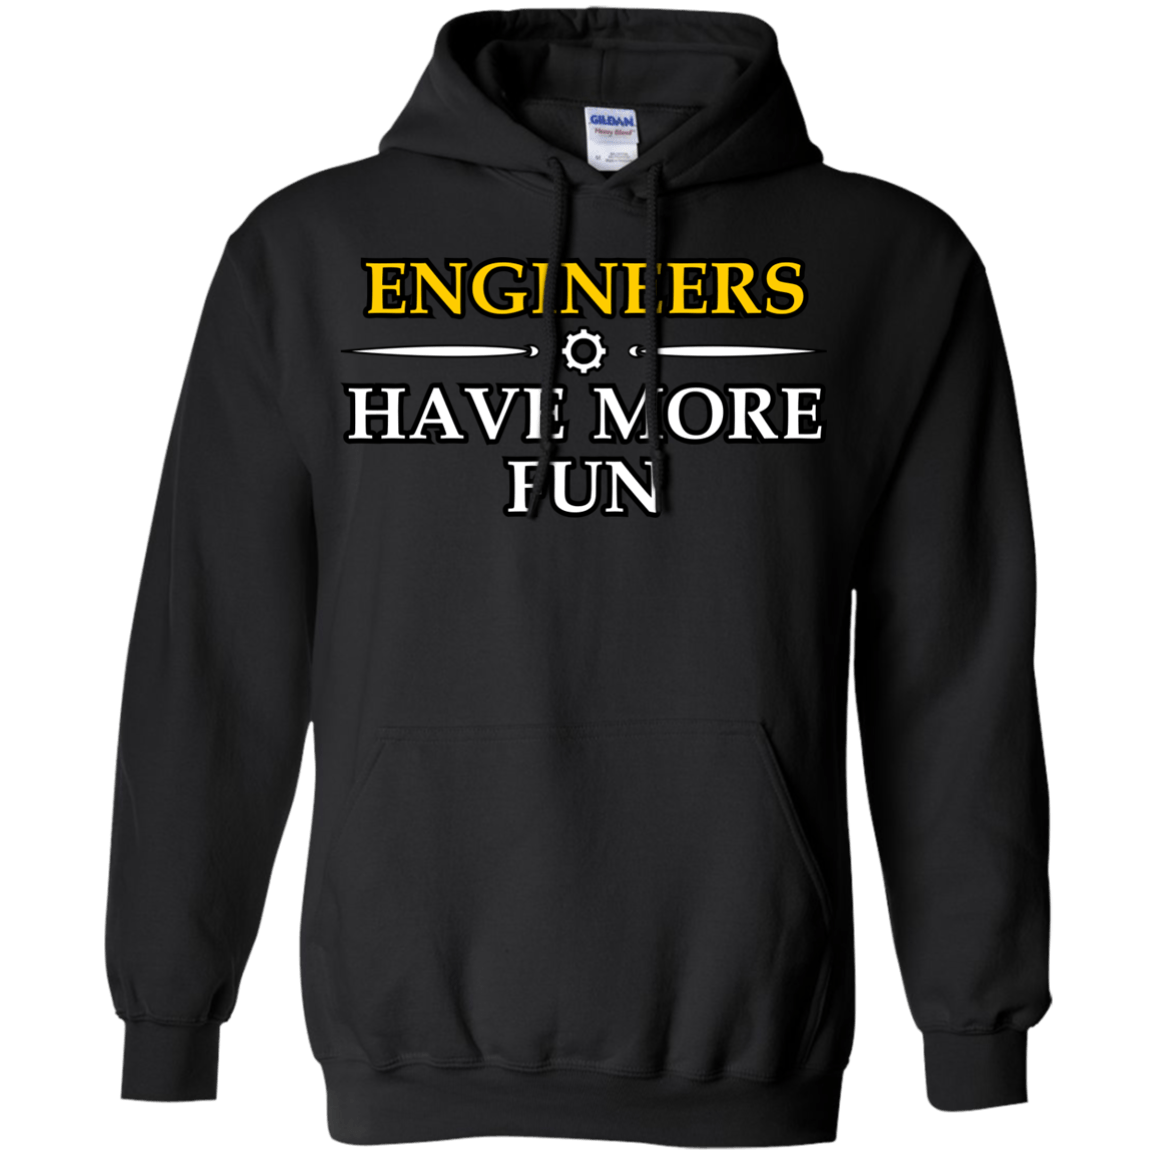 Engineers Have More Fun - Engineering Outfitters